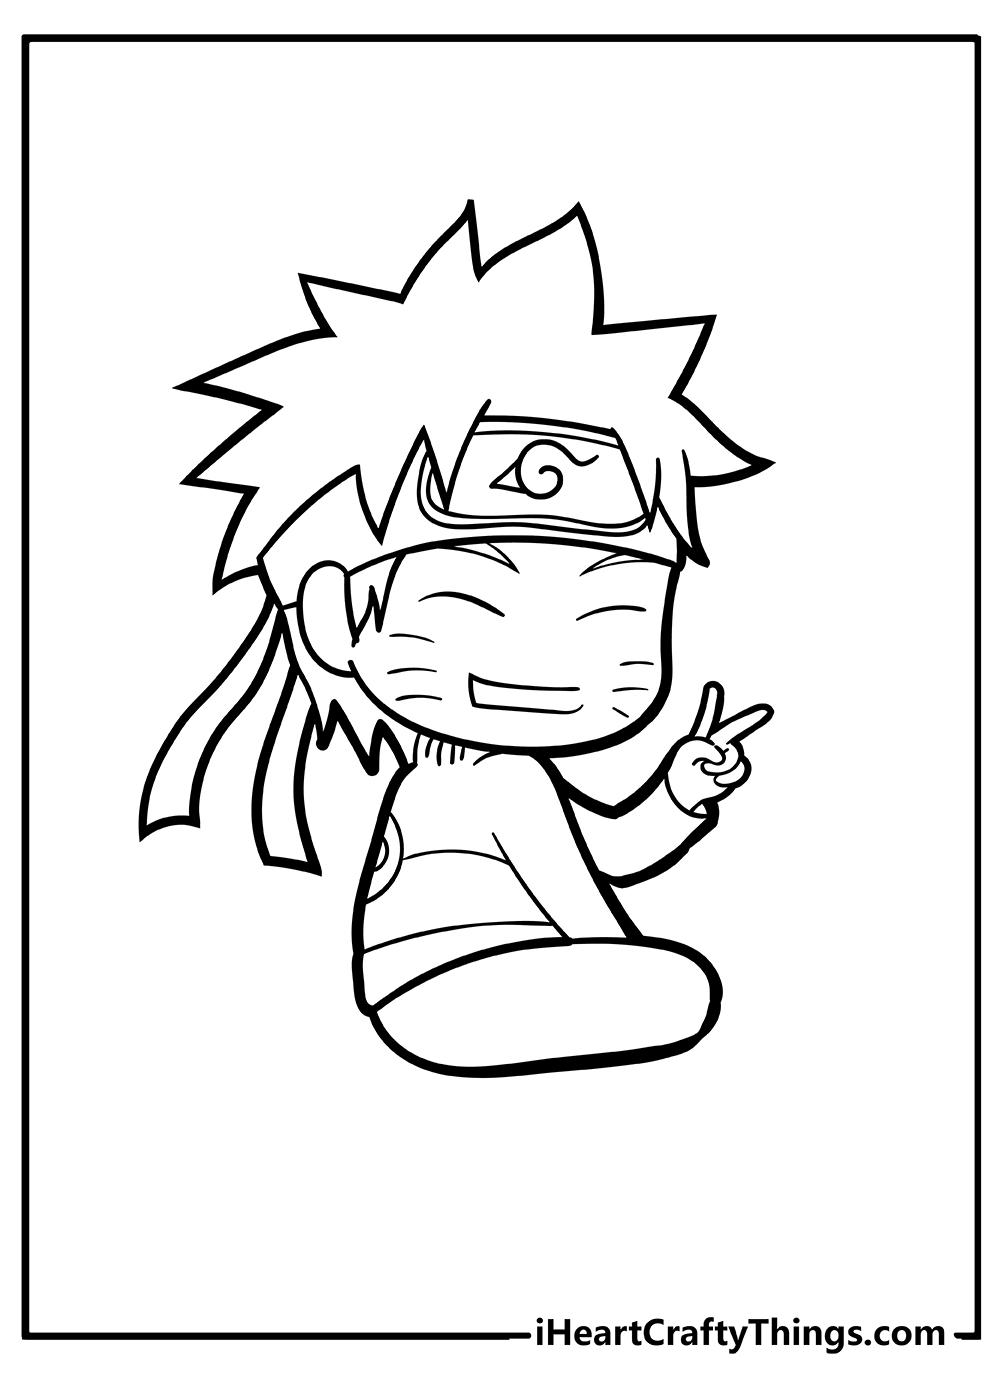 Chibi Coloring Pages for kids free download